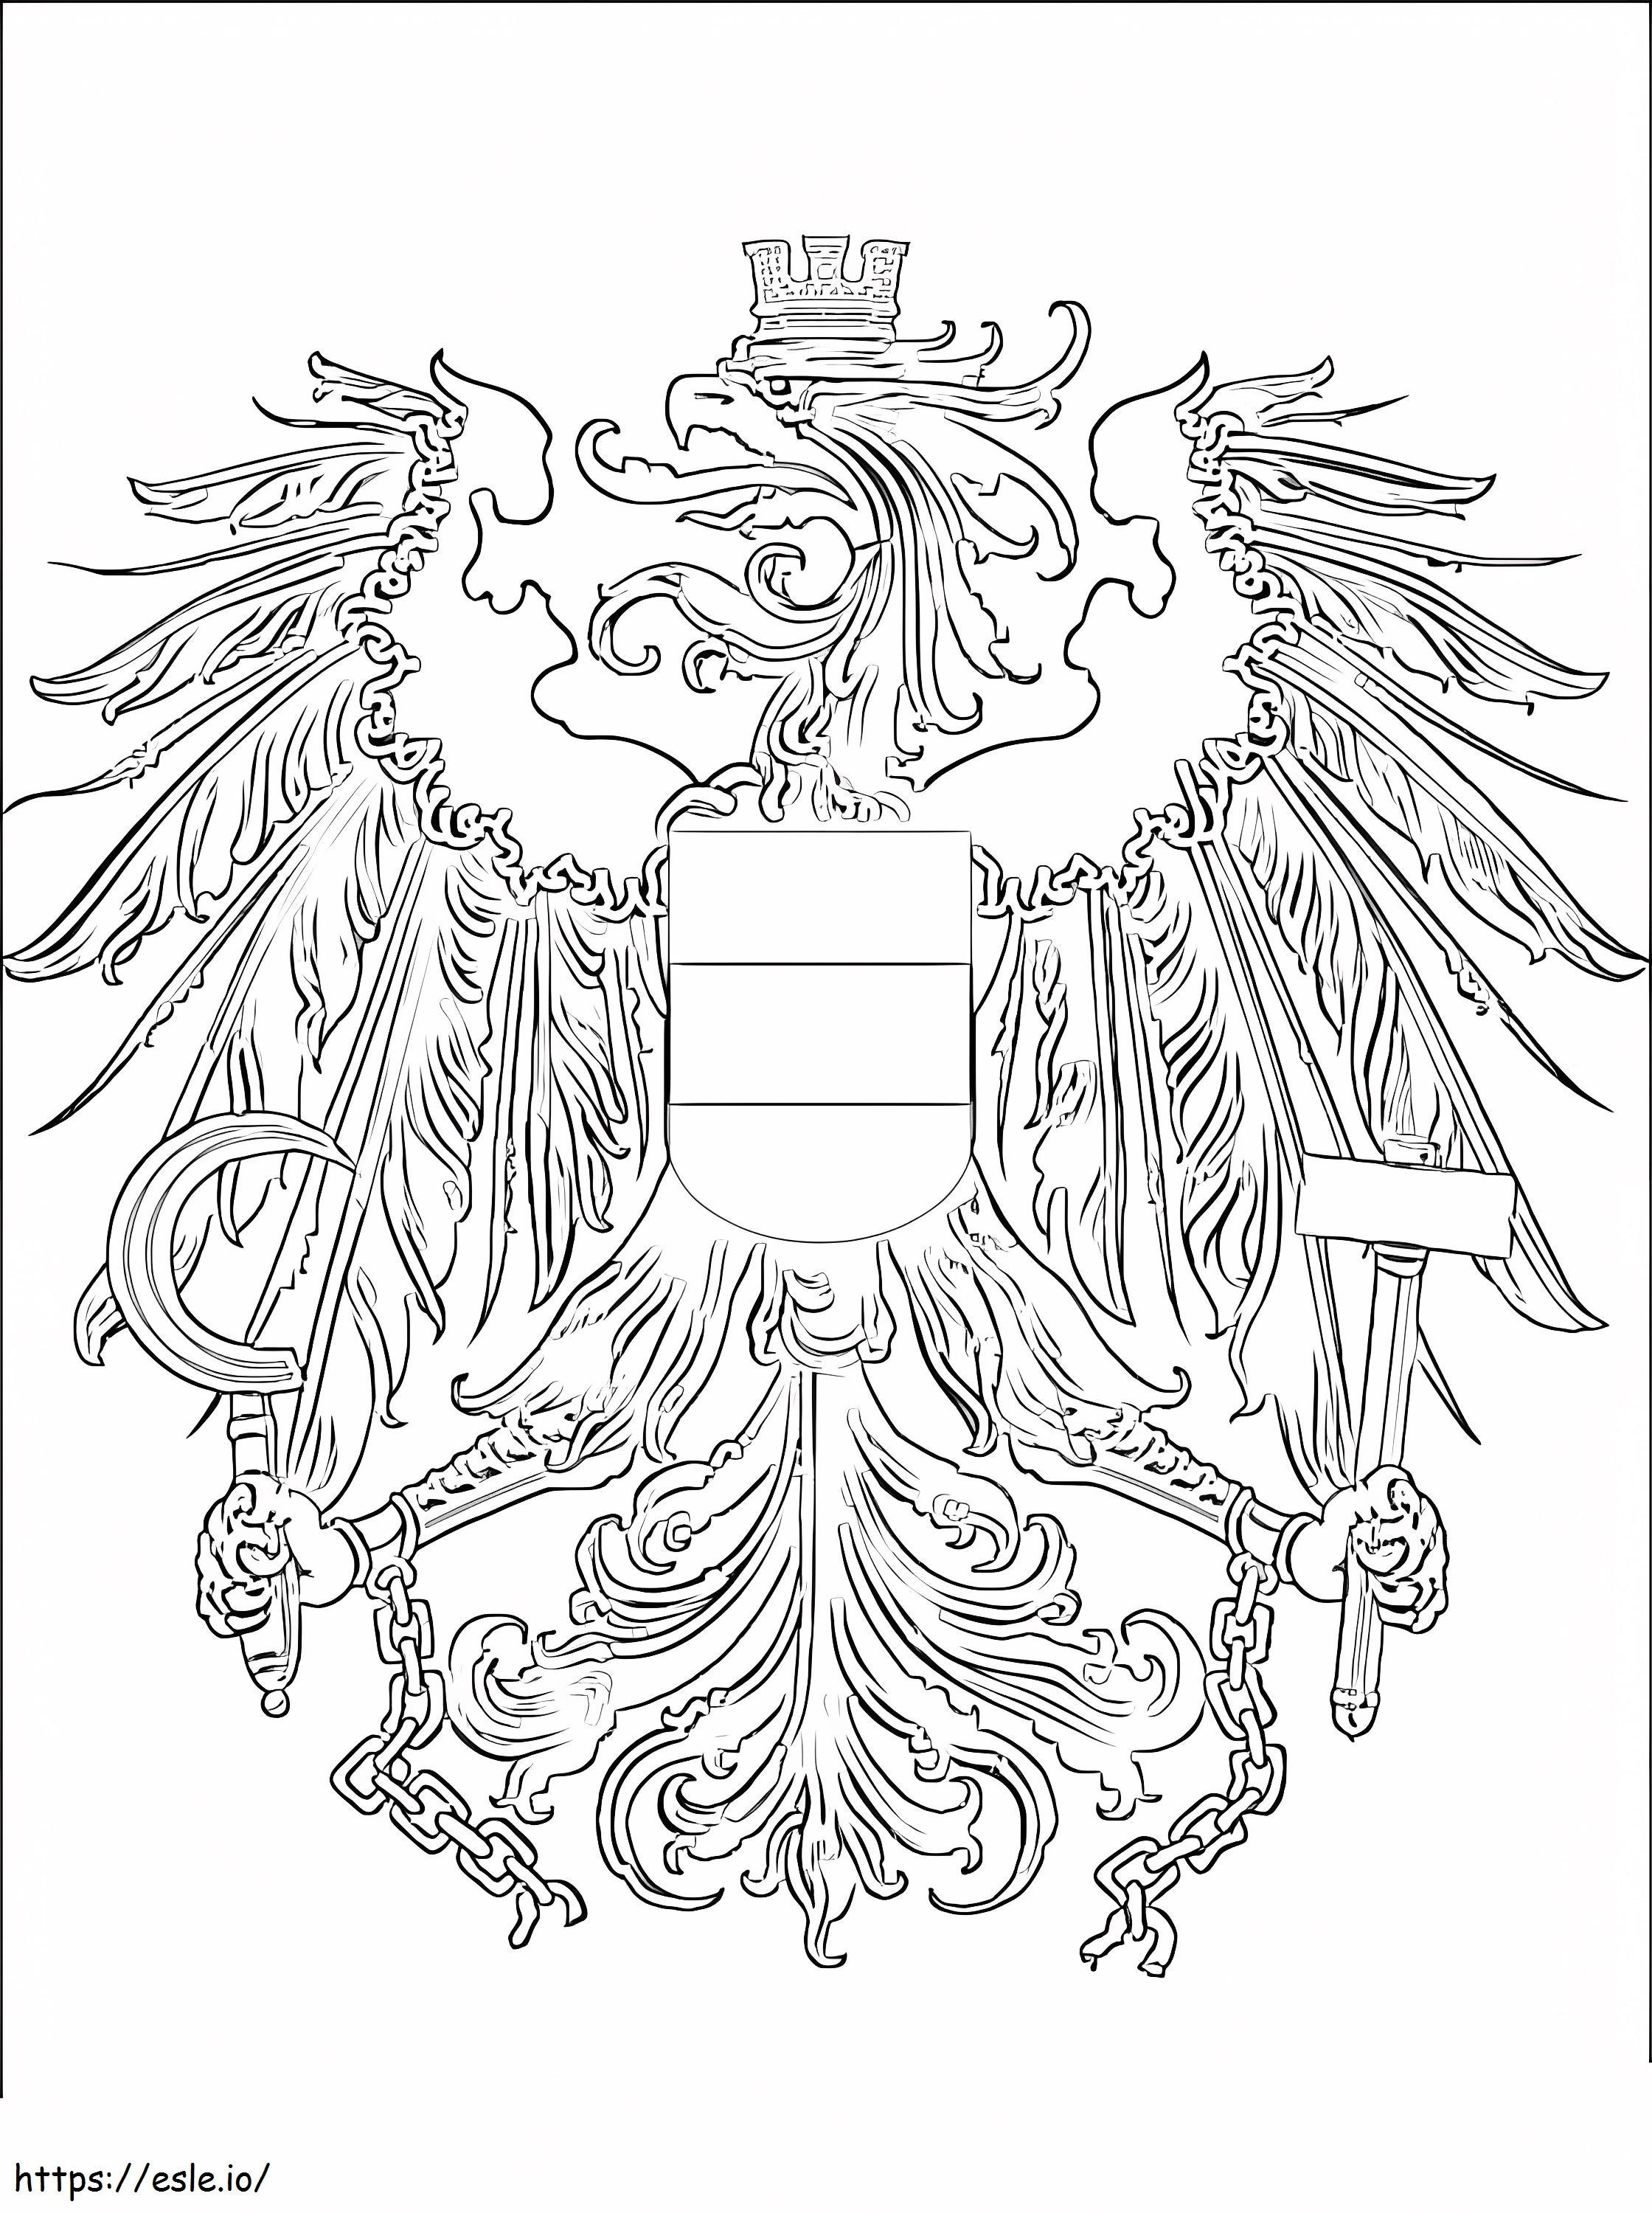 Austria Coat Of Arms coloring page